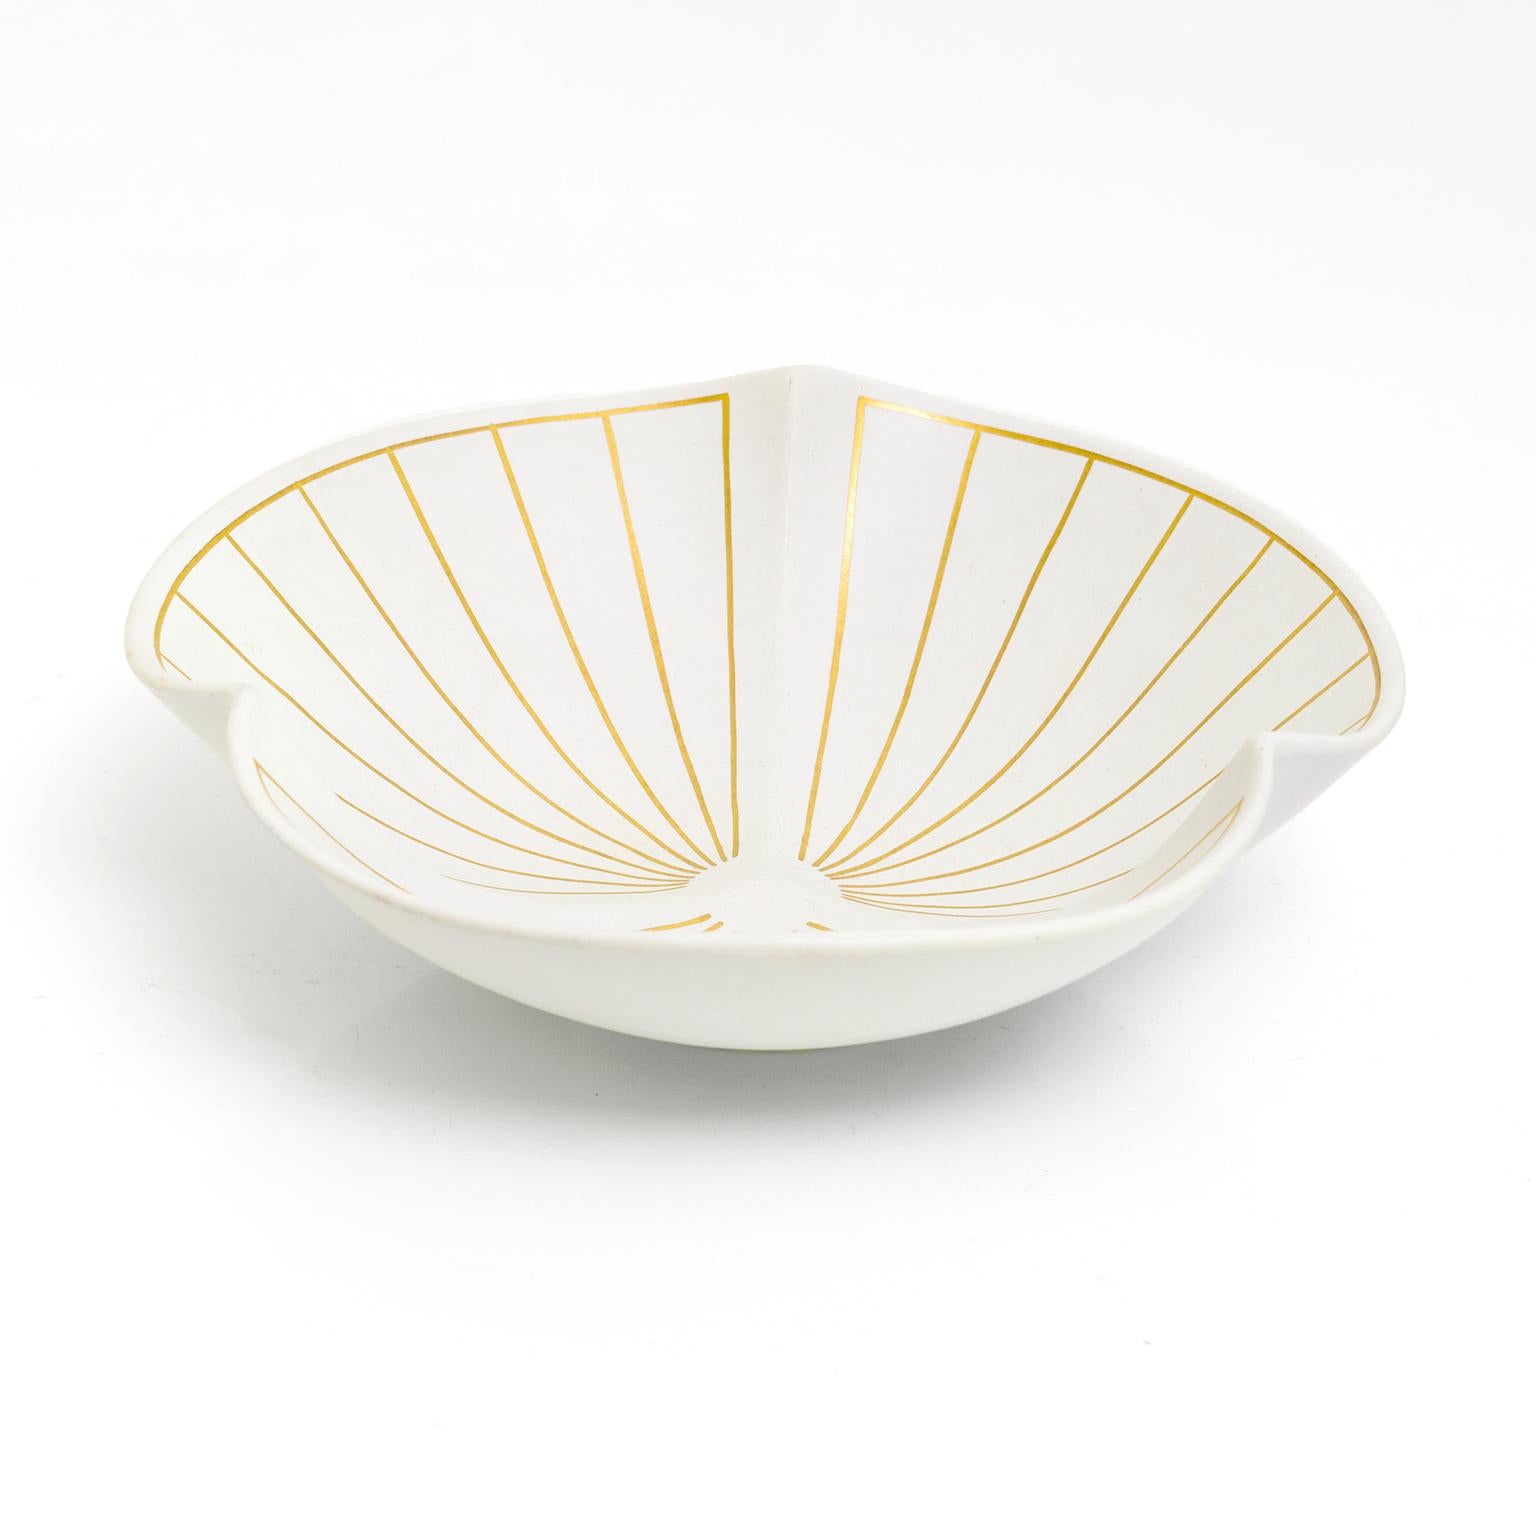 Guldsurrea Series Stoneware Bowl by Wilhelm Kage, Gustavsberg, Sweden In Good Condition For Sale In New York, NY